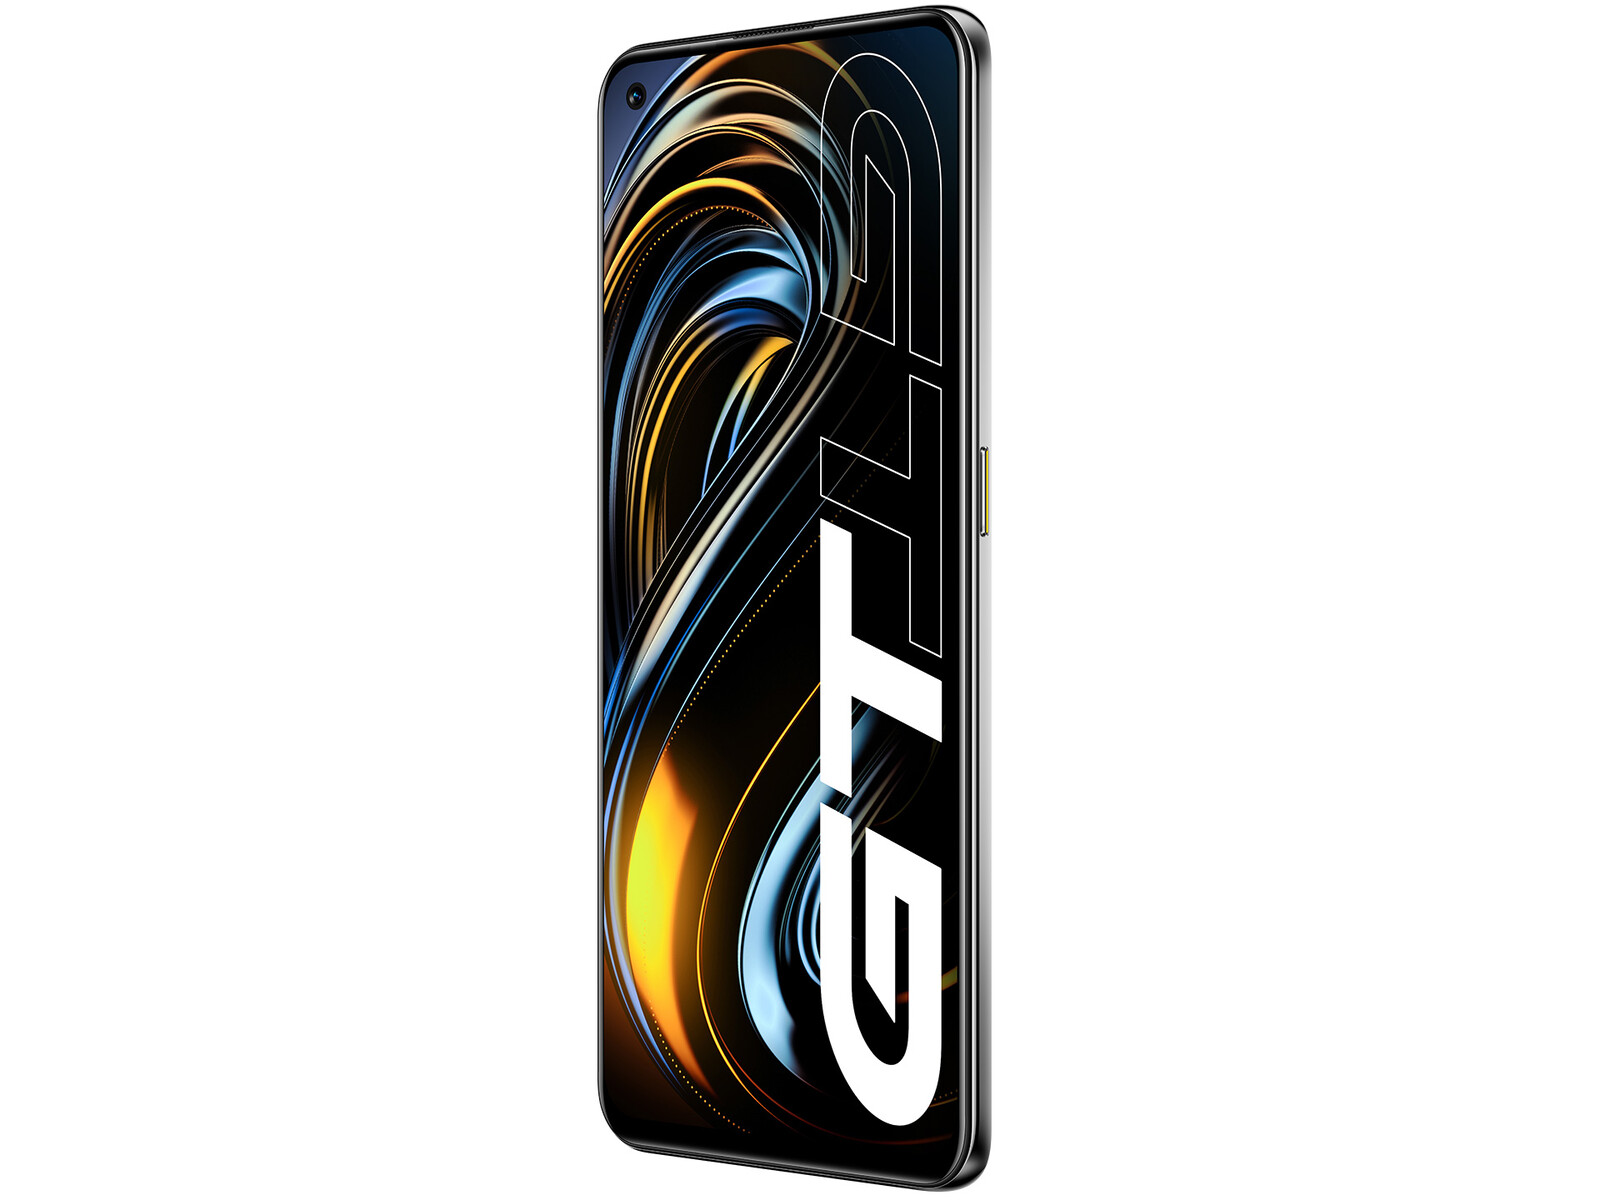 Realme GT 2 Pro review: Well-rounded power package - 9to5Google